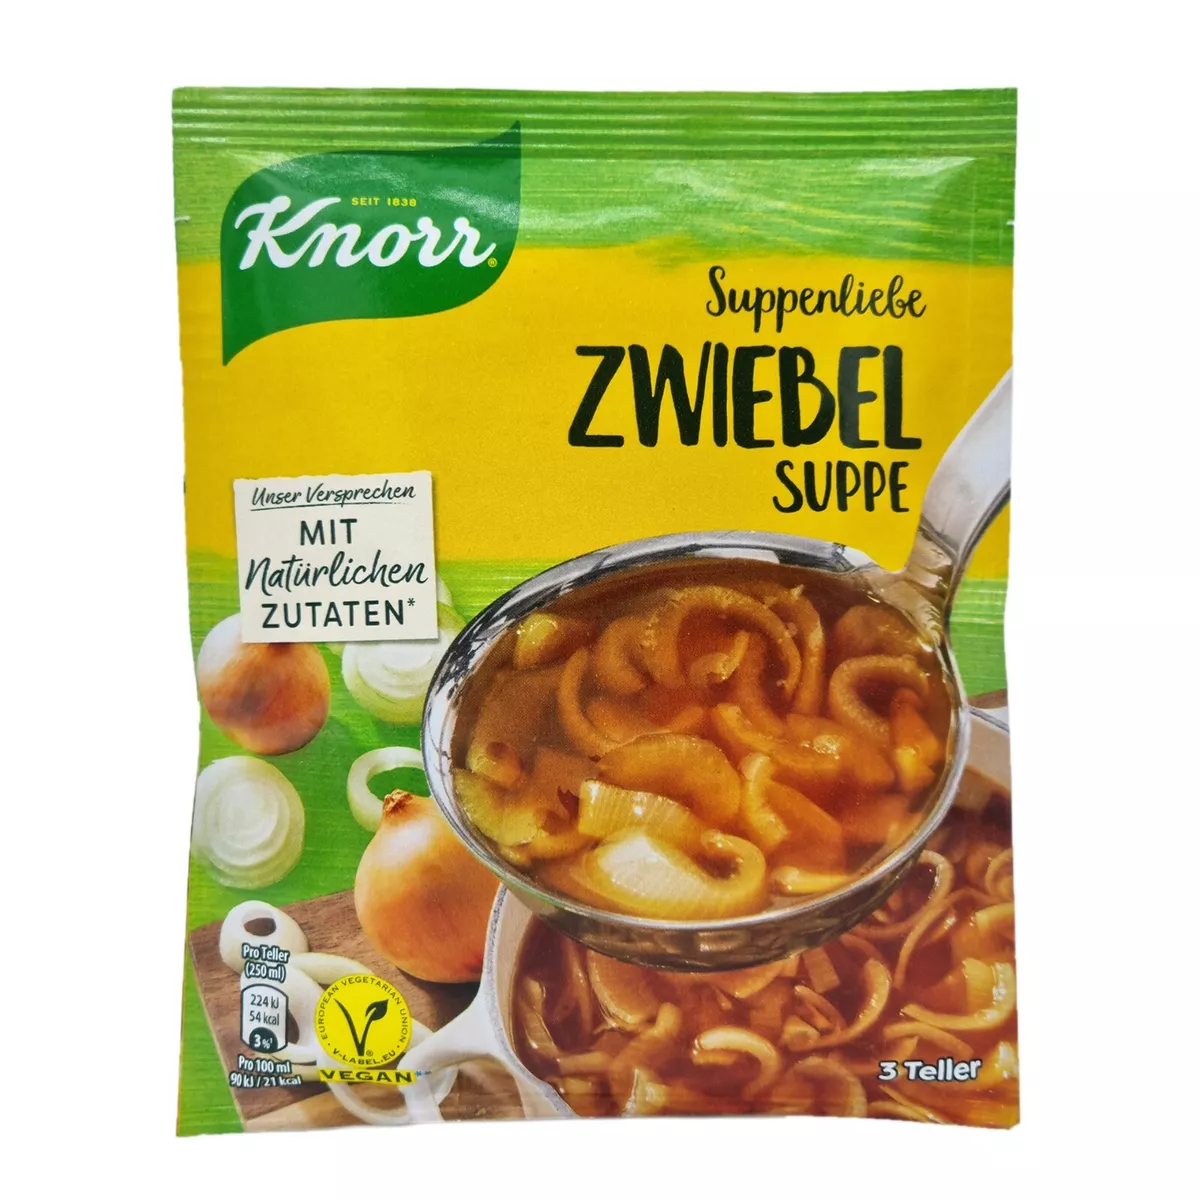 8x Knorr Suppenliebe 🍲 Zwiebel Suppe onion soup ✈TRACKED SHIPPING | eBay | 